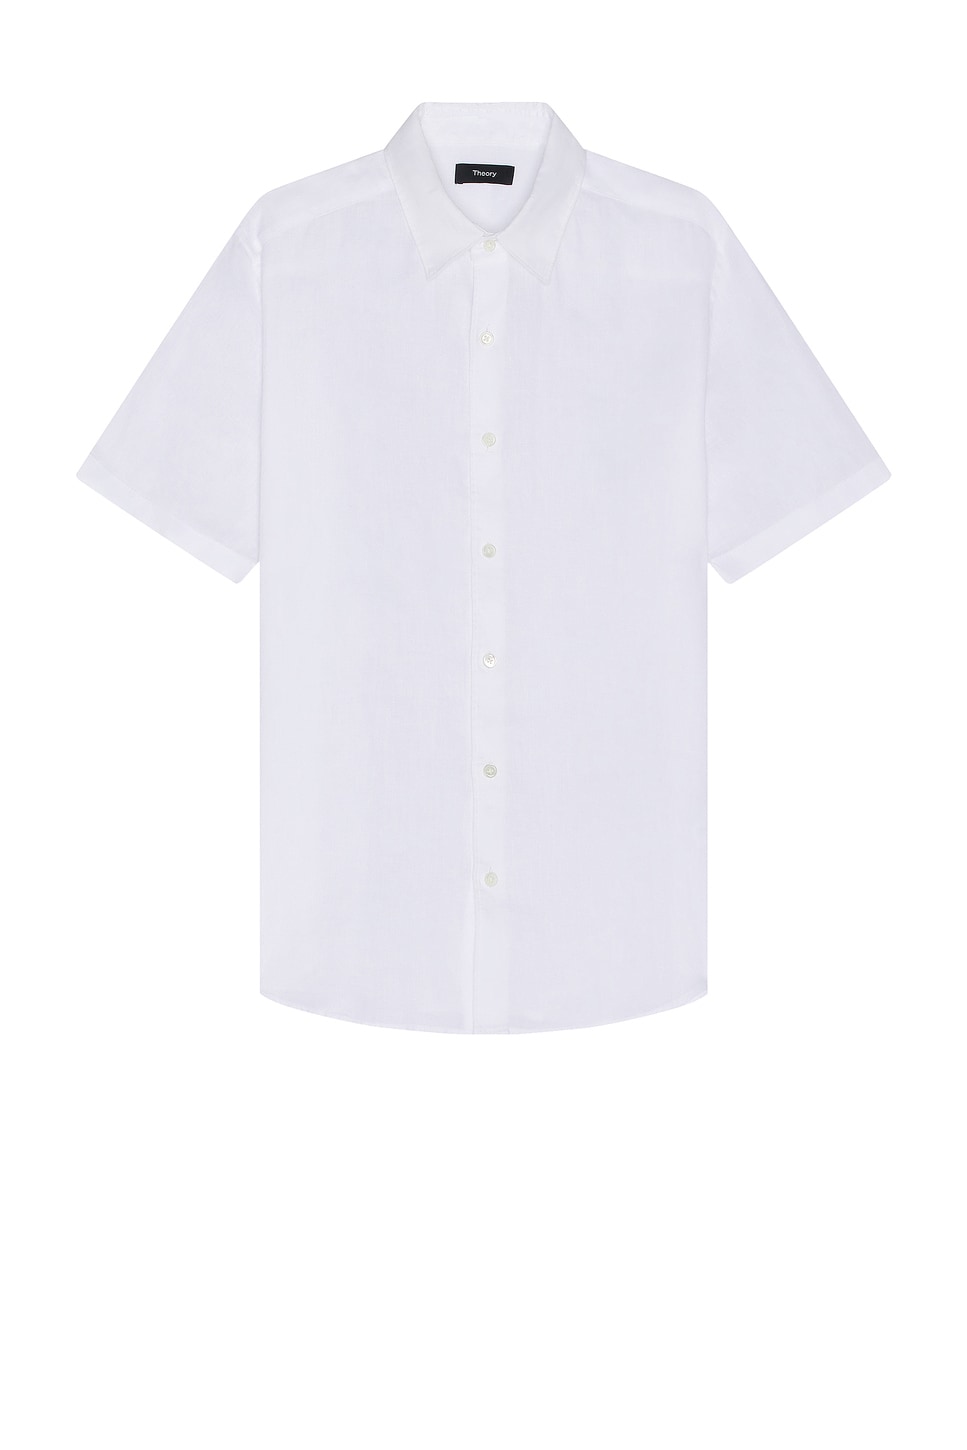 Image 1 of Theory Irving Linen Short Sleeve Shirt in White